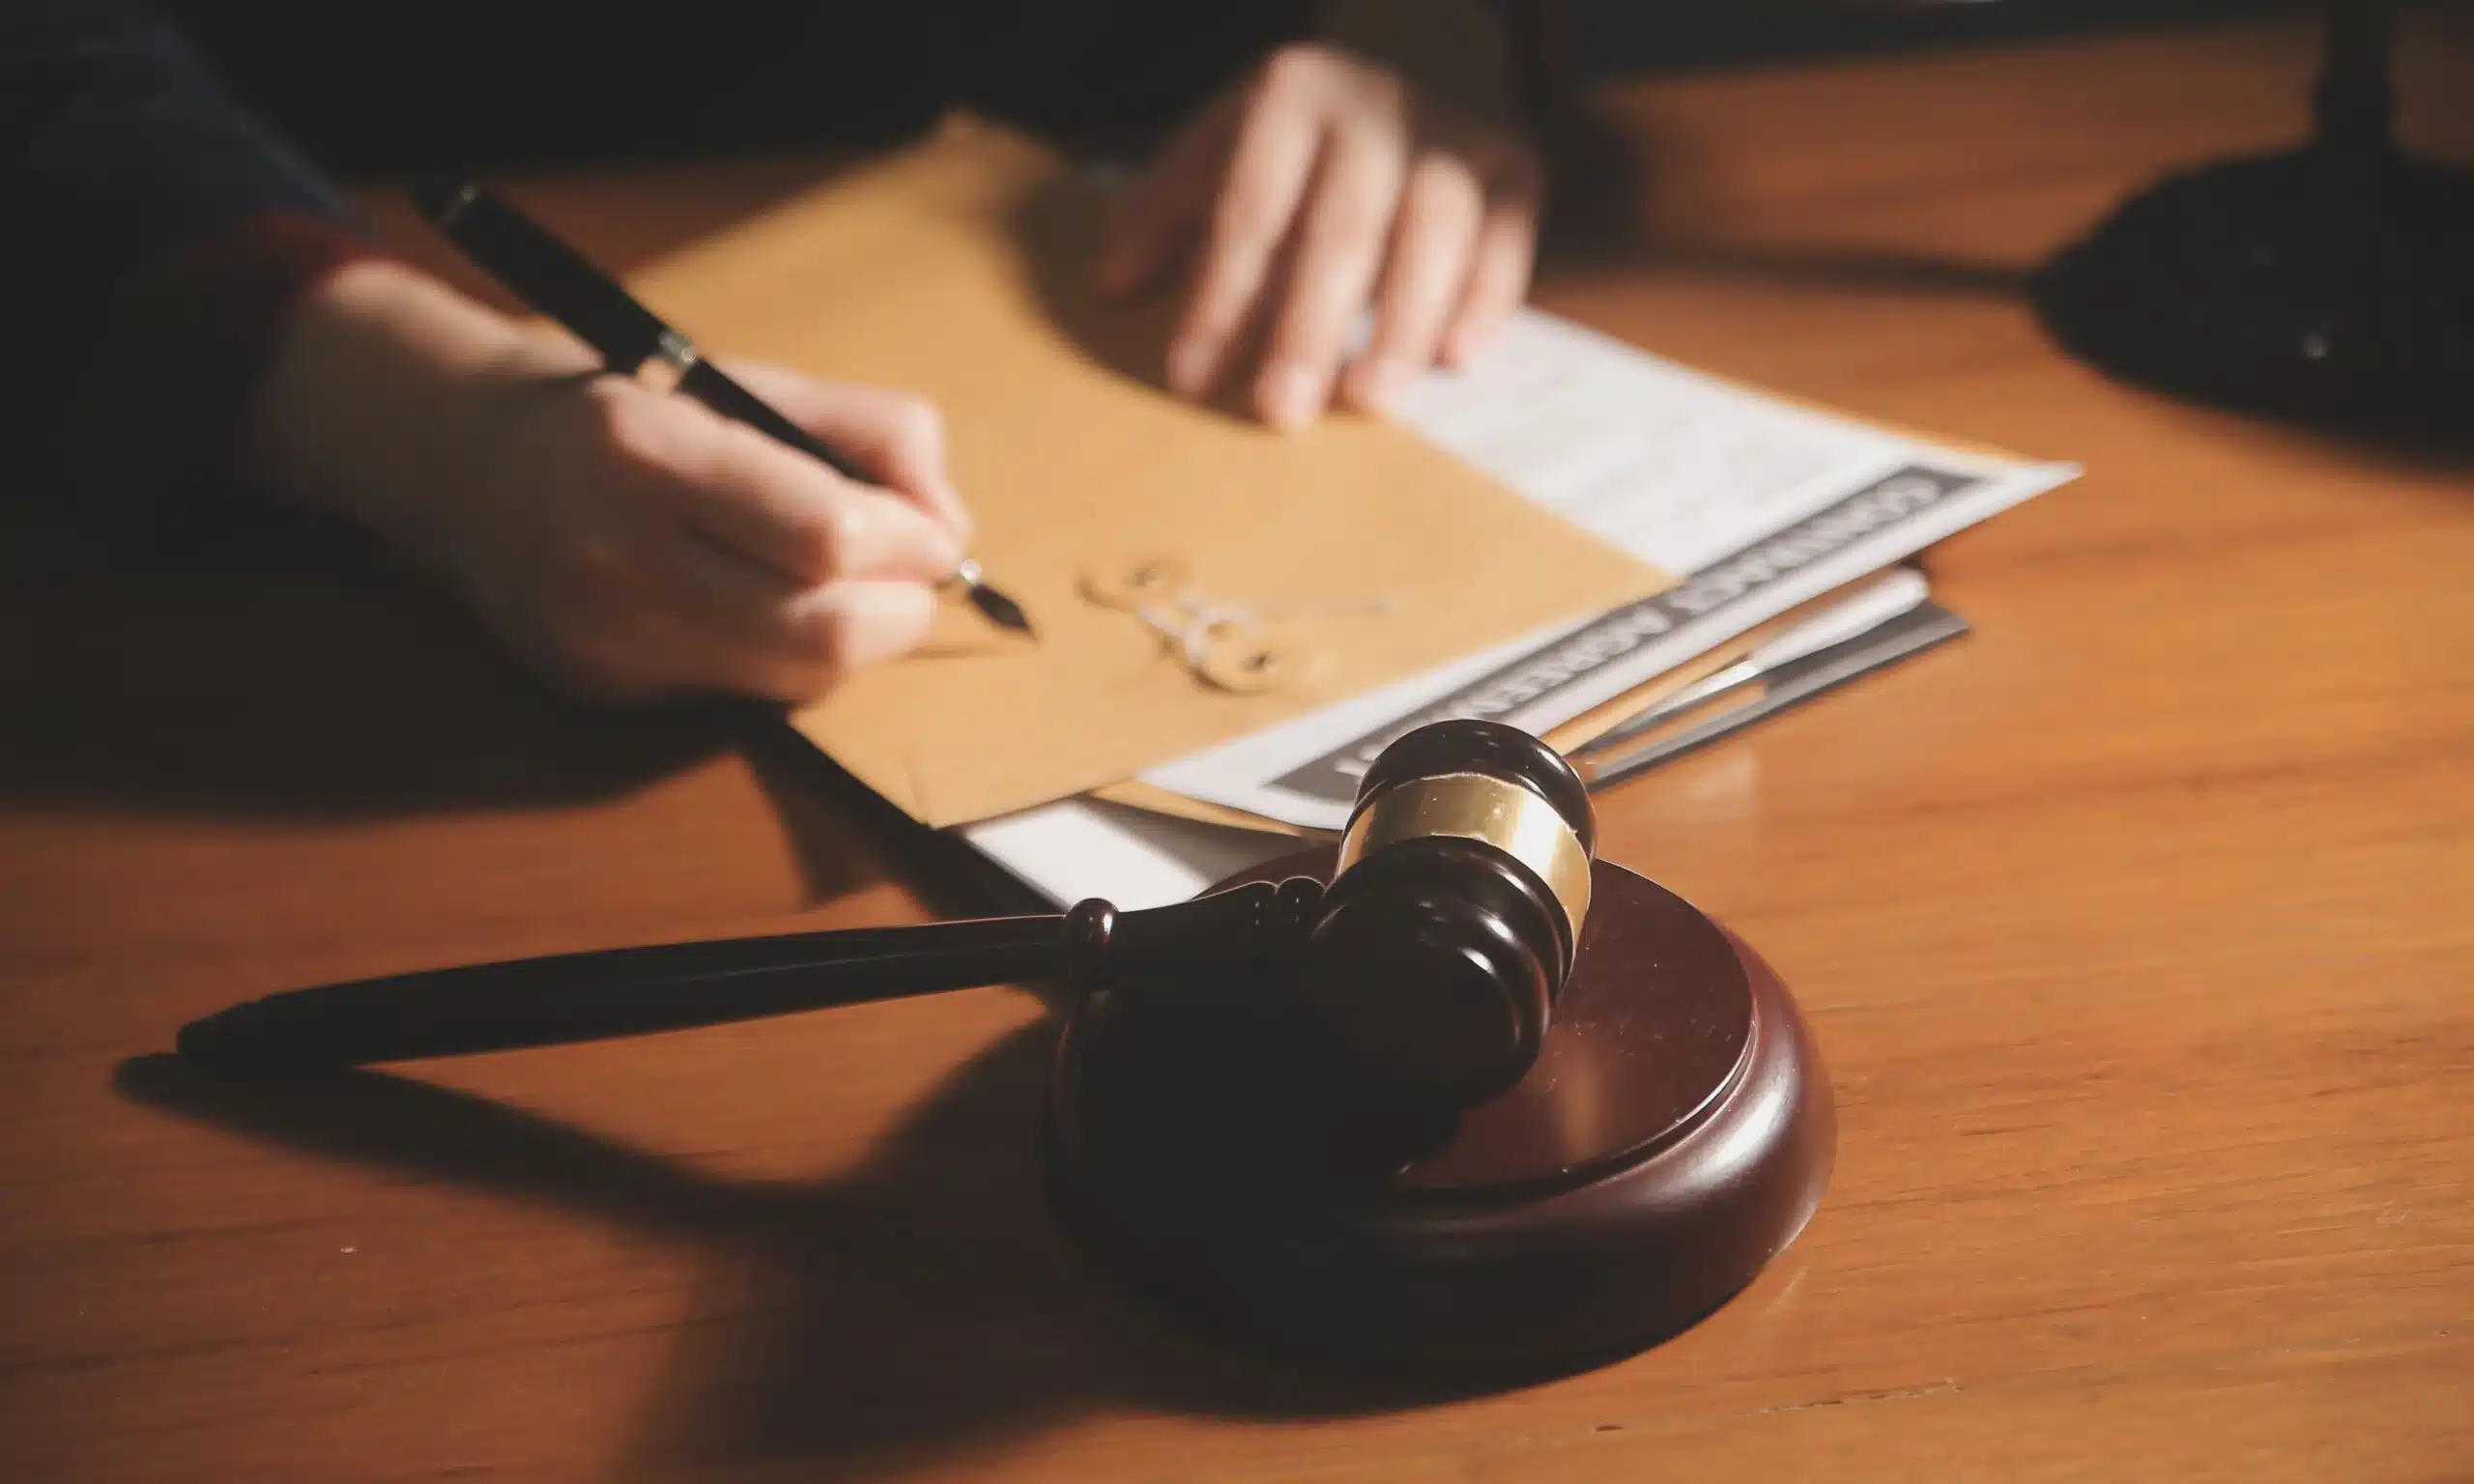 A personal injury lawyer signing an envelope containing documents he needs to send a client.